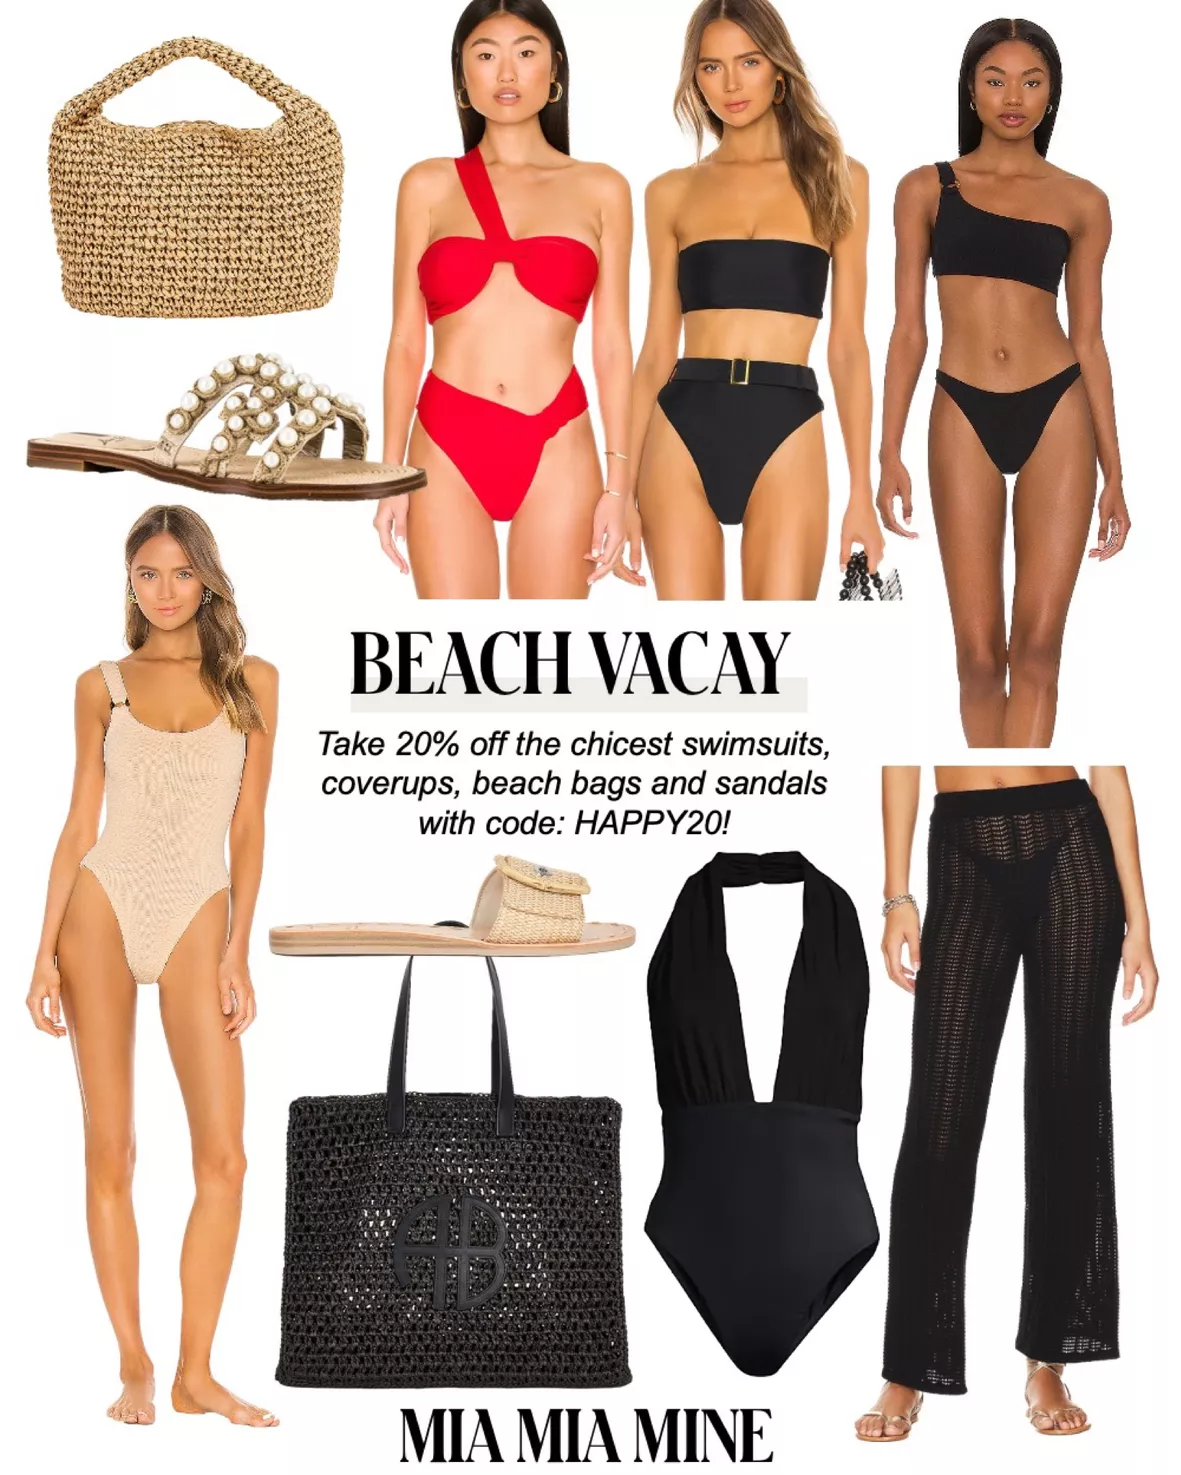 20 Swimsuit Outfit Ideas To Wear Off The Beach